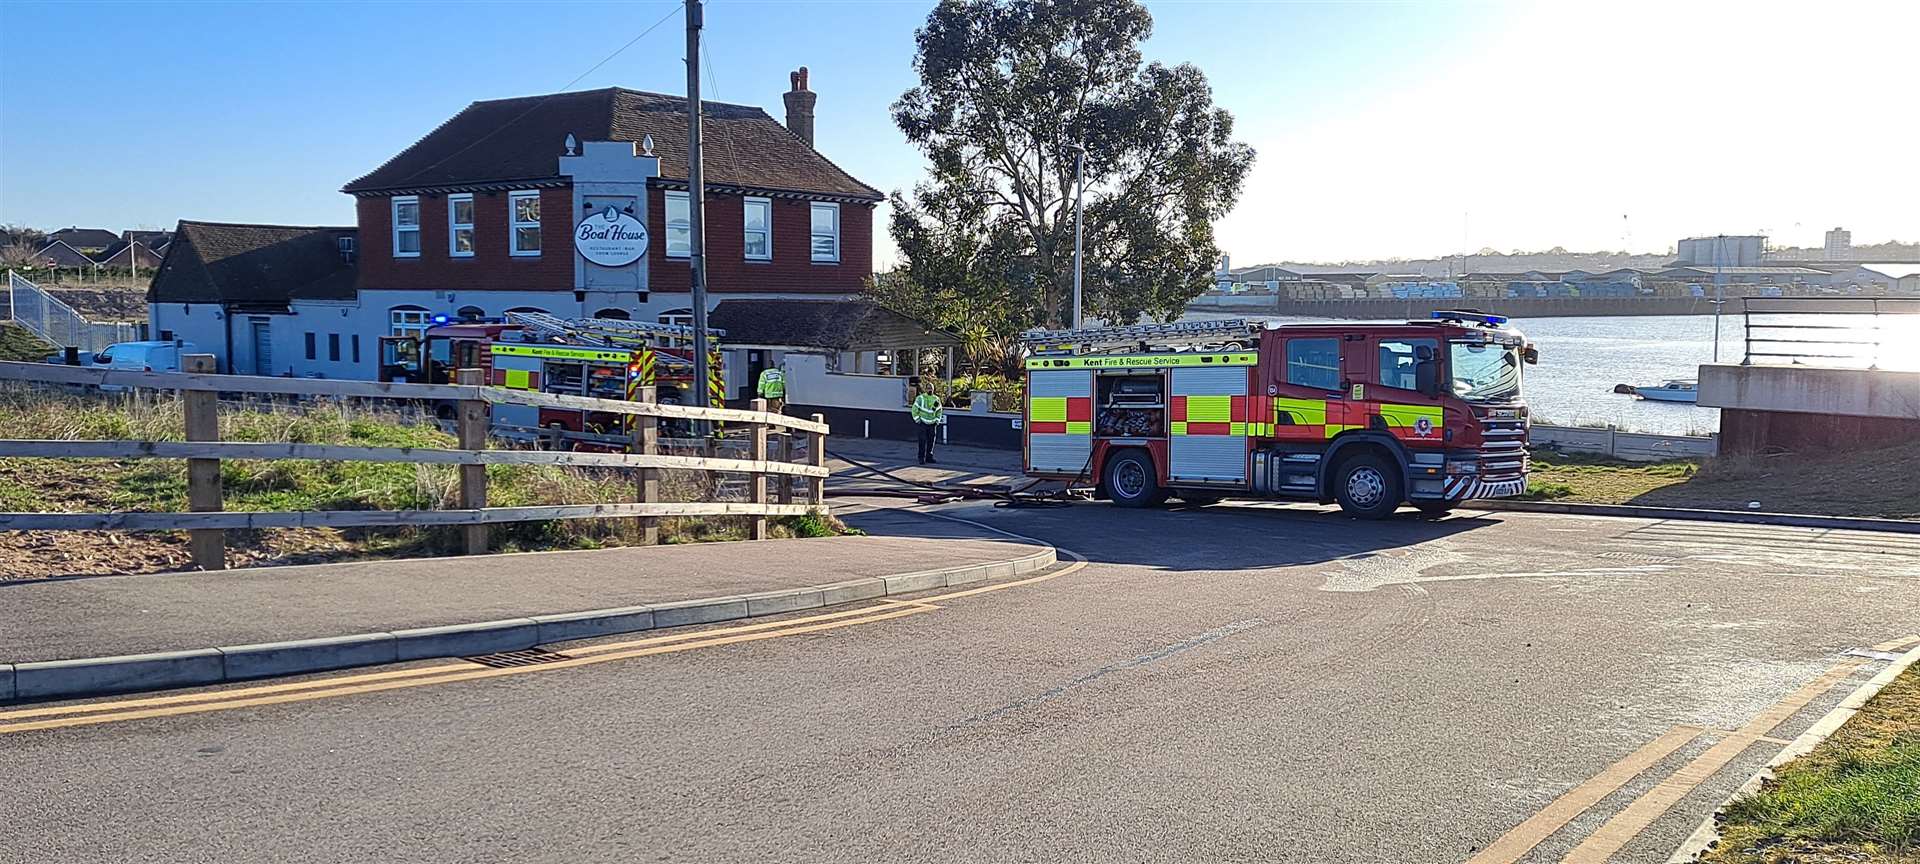 Fire engines outside The Boat House in Strood